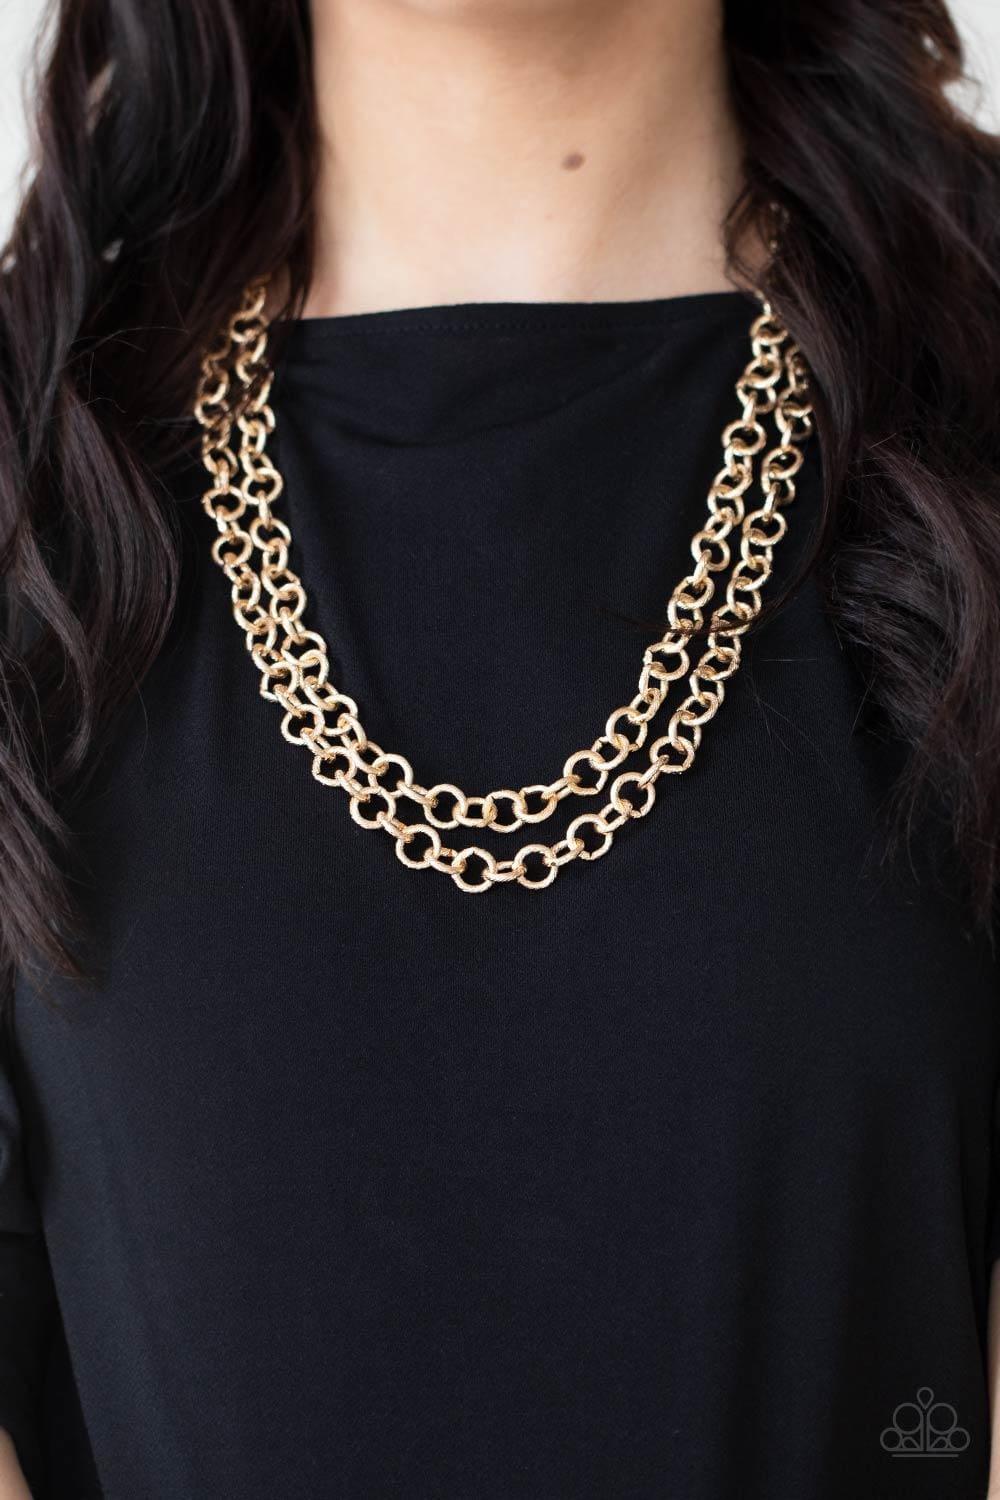 Paparazzi Accessories - Grunge Goals - Gold Necklace - Bling by JessieK